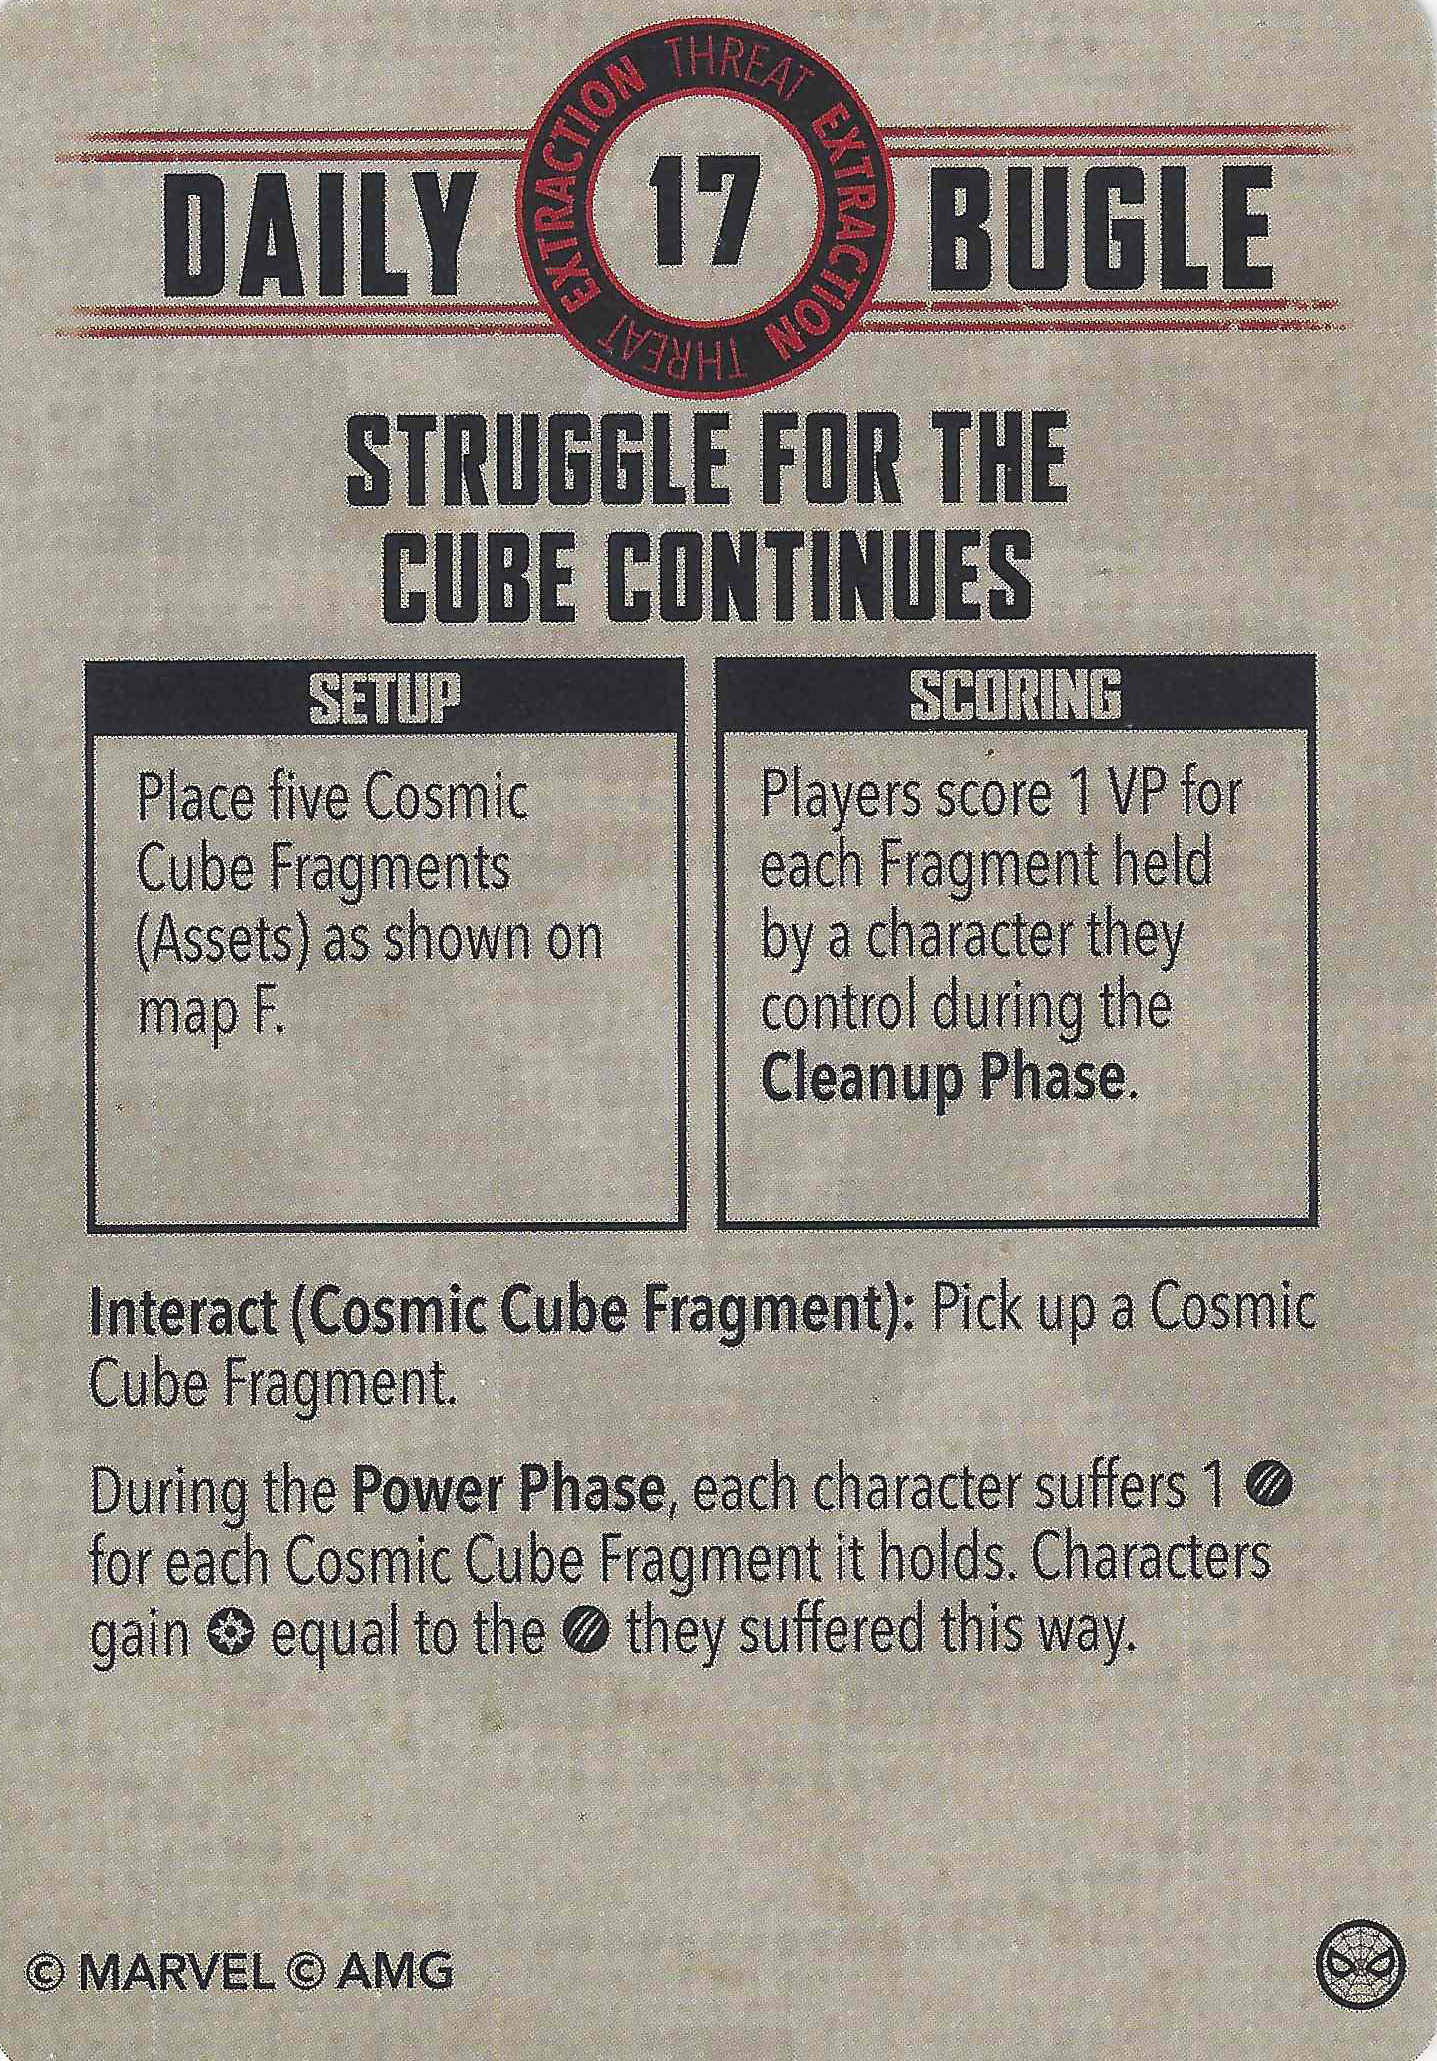 Marvel Crisis Protocol - Struggle for the cube continues